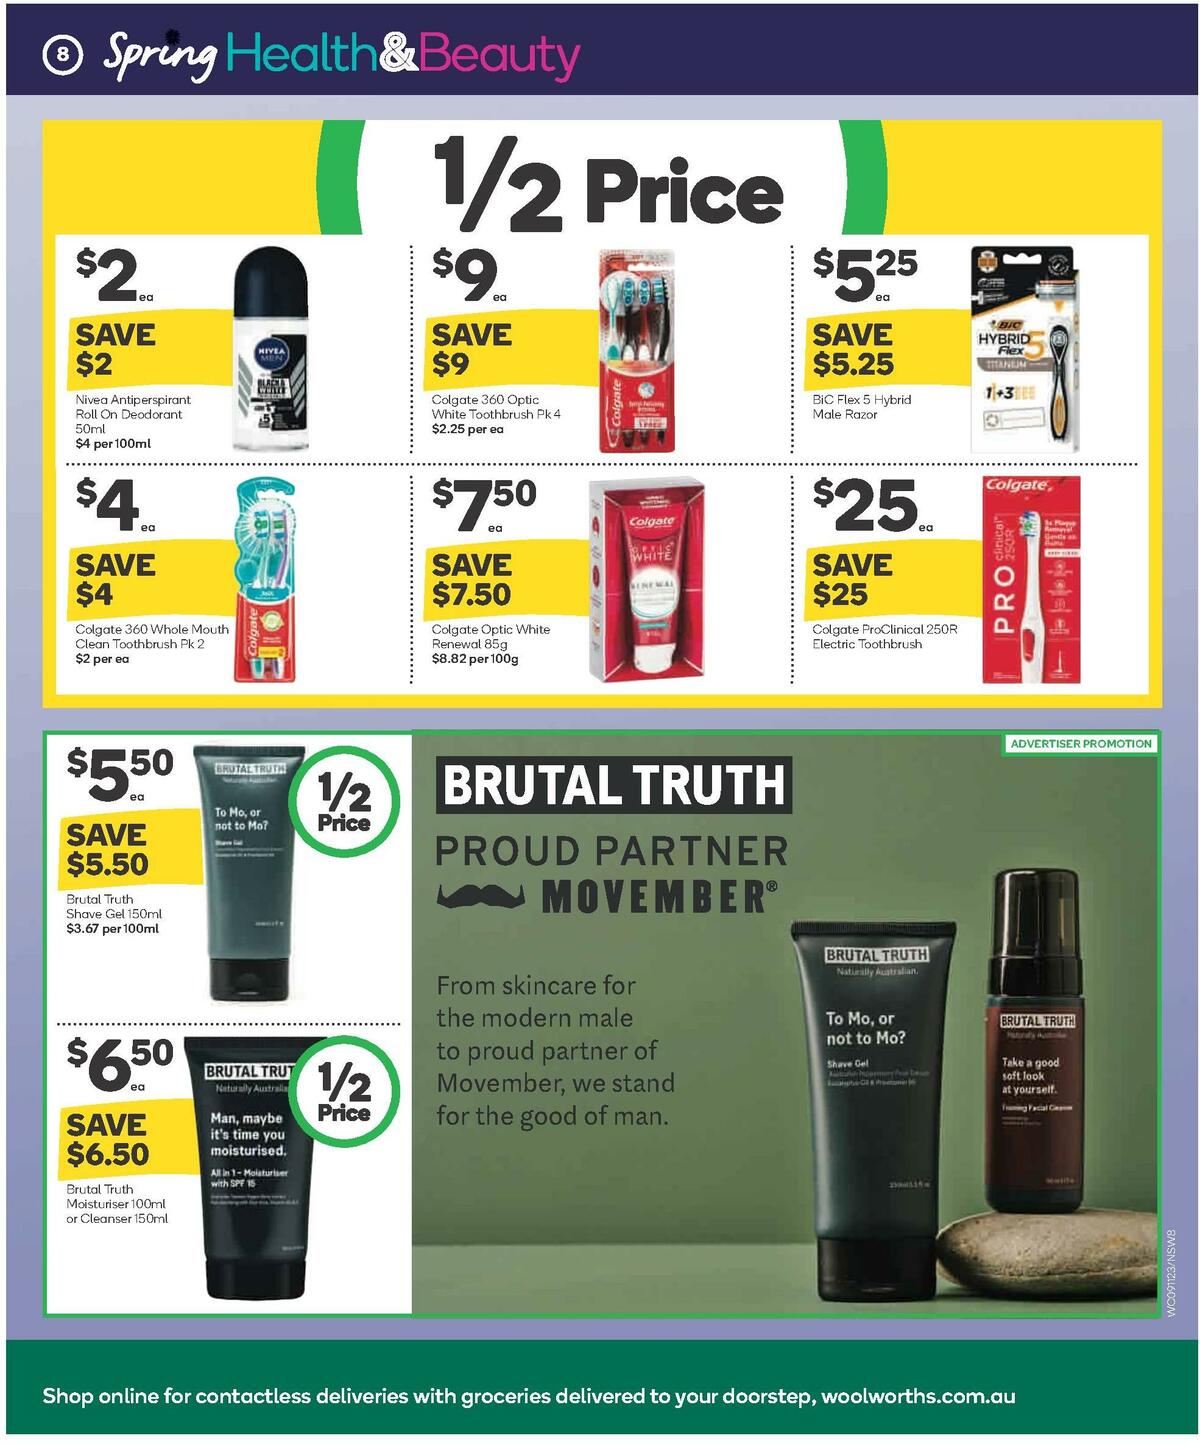 Woolworths Spring Health & Beauty Catalogues from 9 November